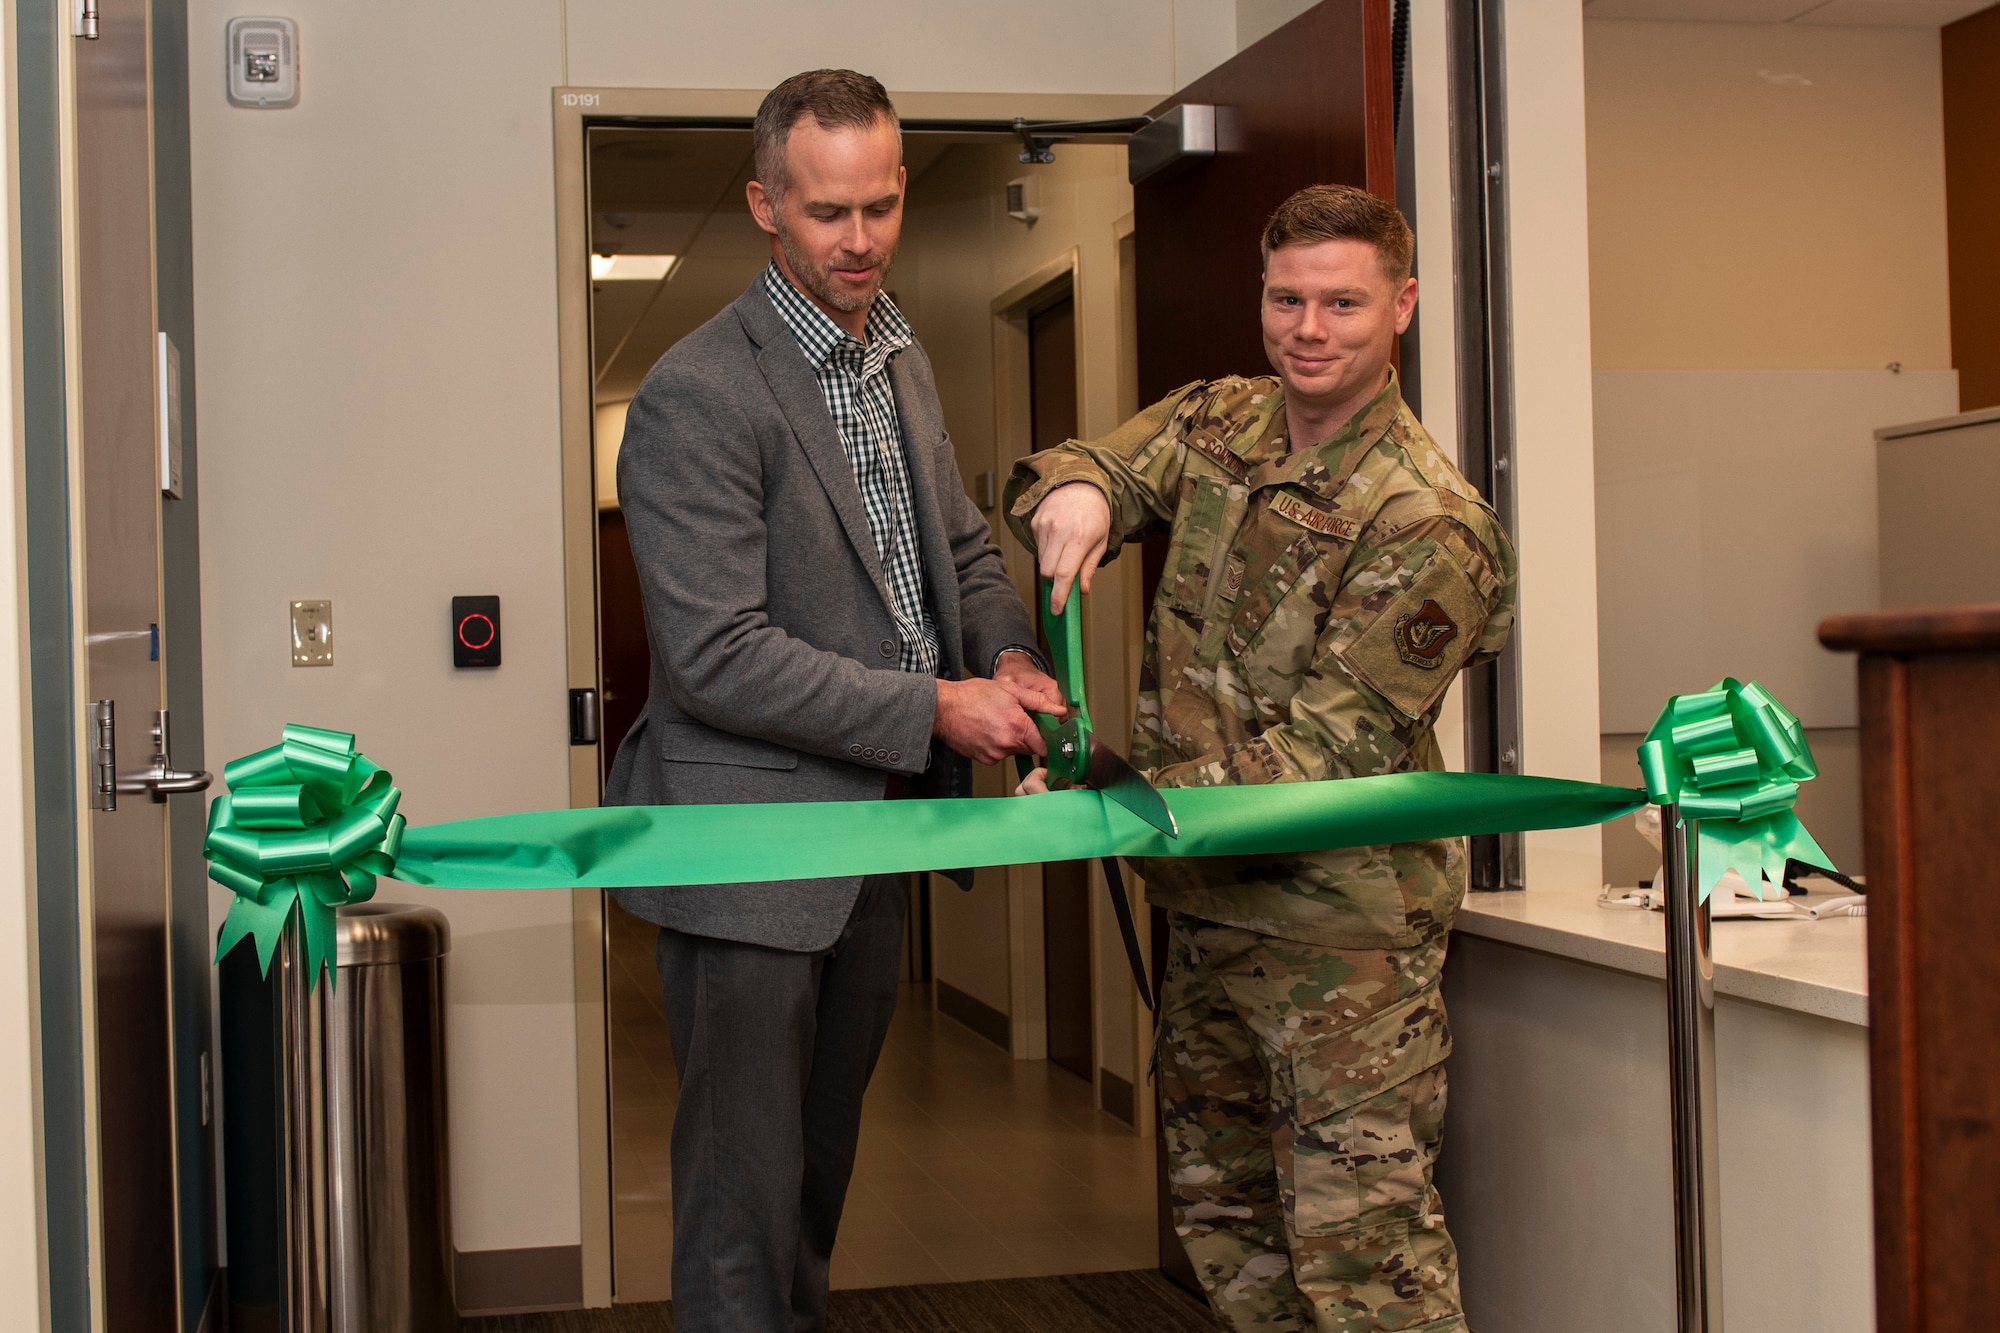 Matt Clugston (left), federal healthcare program manager with Walsh Construction, and U.S. Air Force Tech. Sgt. Sean Connors, 673d Surgical Operations Squadron MRI technologist, cut the ribbon at a ribbon-cutting ceremony for the new MRI suite in the Joint Base Elmendorf-Richardson hospital on JBER, Alaska, Oct. 28, 2019. The MRI area remodel included the creation of one joint control room, rather than the former two control rooms in separate areas; an upgraded 1.5 Tesla GE scanner; and newer patient amenities such as dressing rooms, a reception desk, a waiting area, and murals and lighting in the scanner rooms for patient comfort.